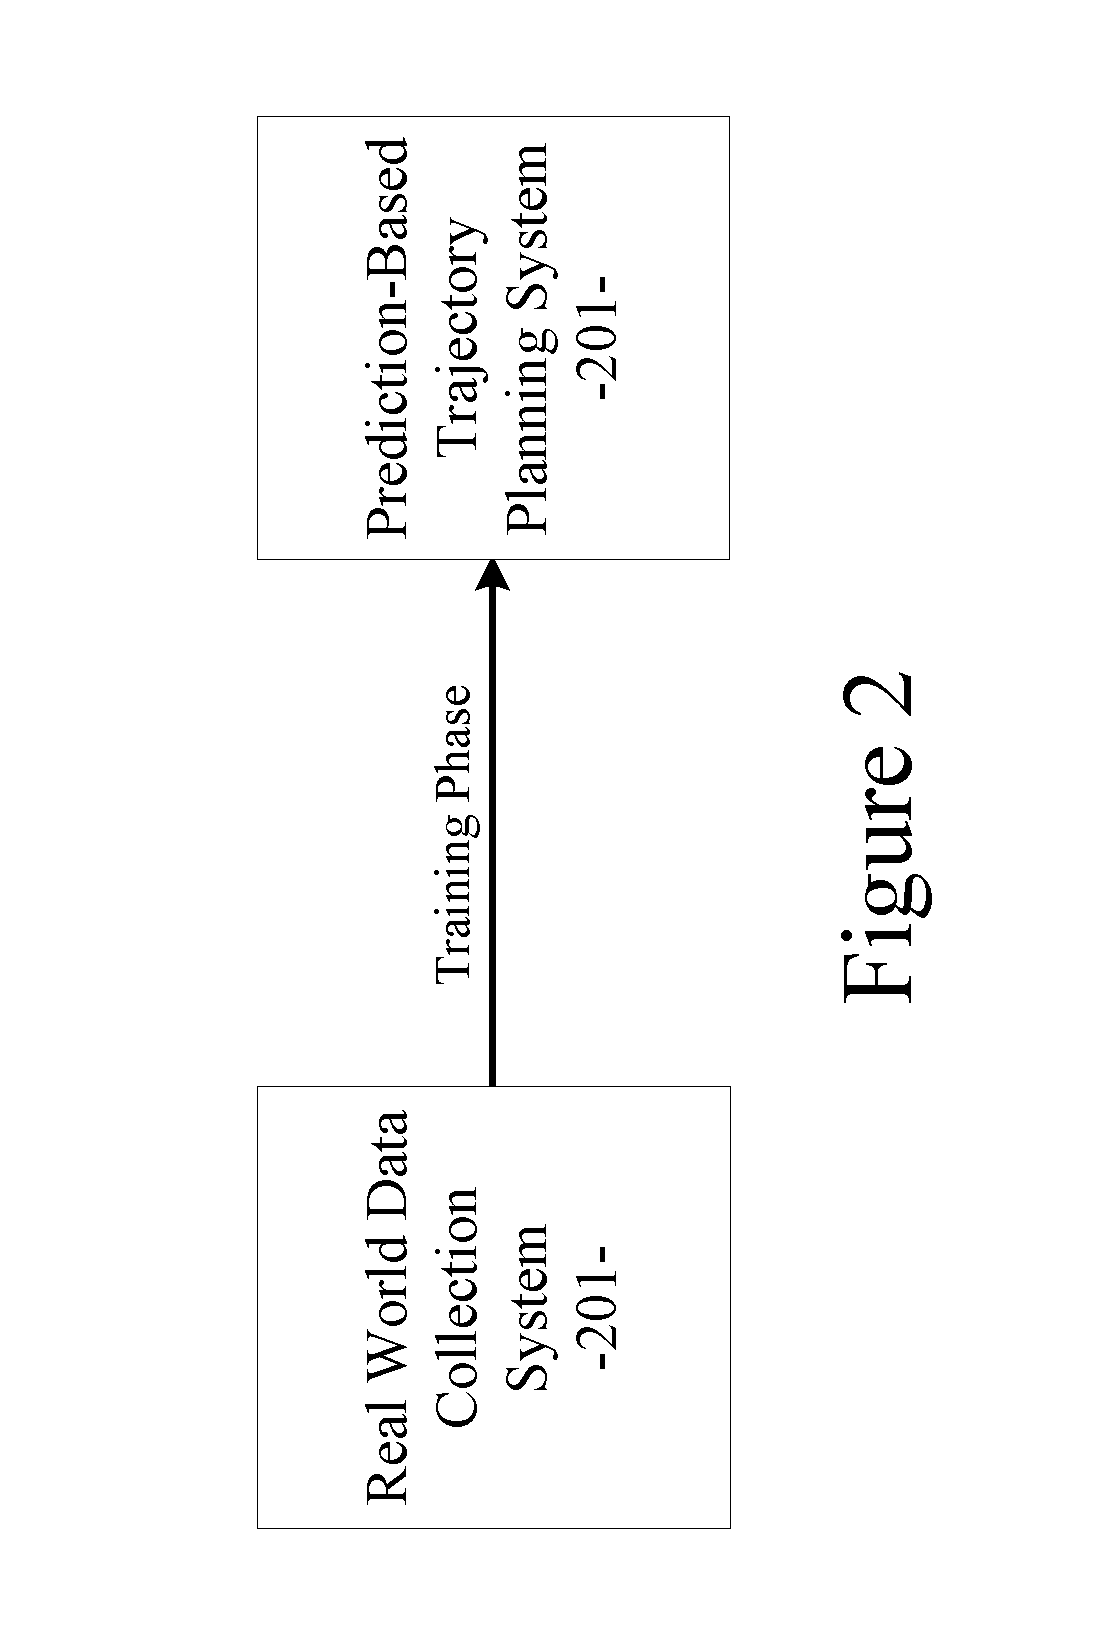 Data-driven prediction-based system and method for trajectory planning of autonomous vehicles